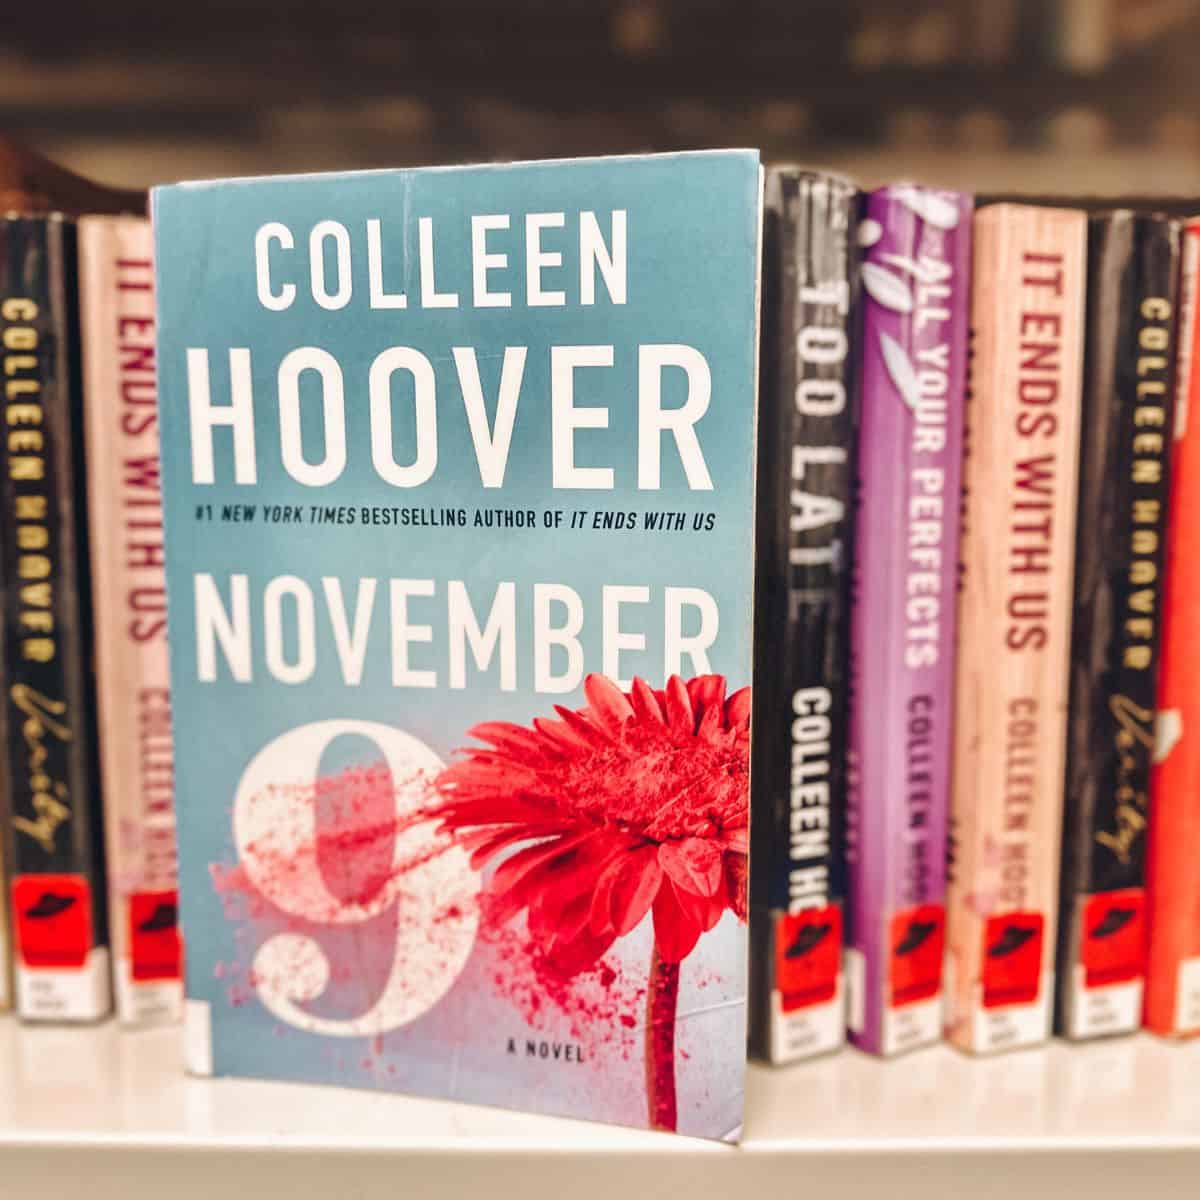 Colleen Hoover’s November 9: Summary (With Ending)